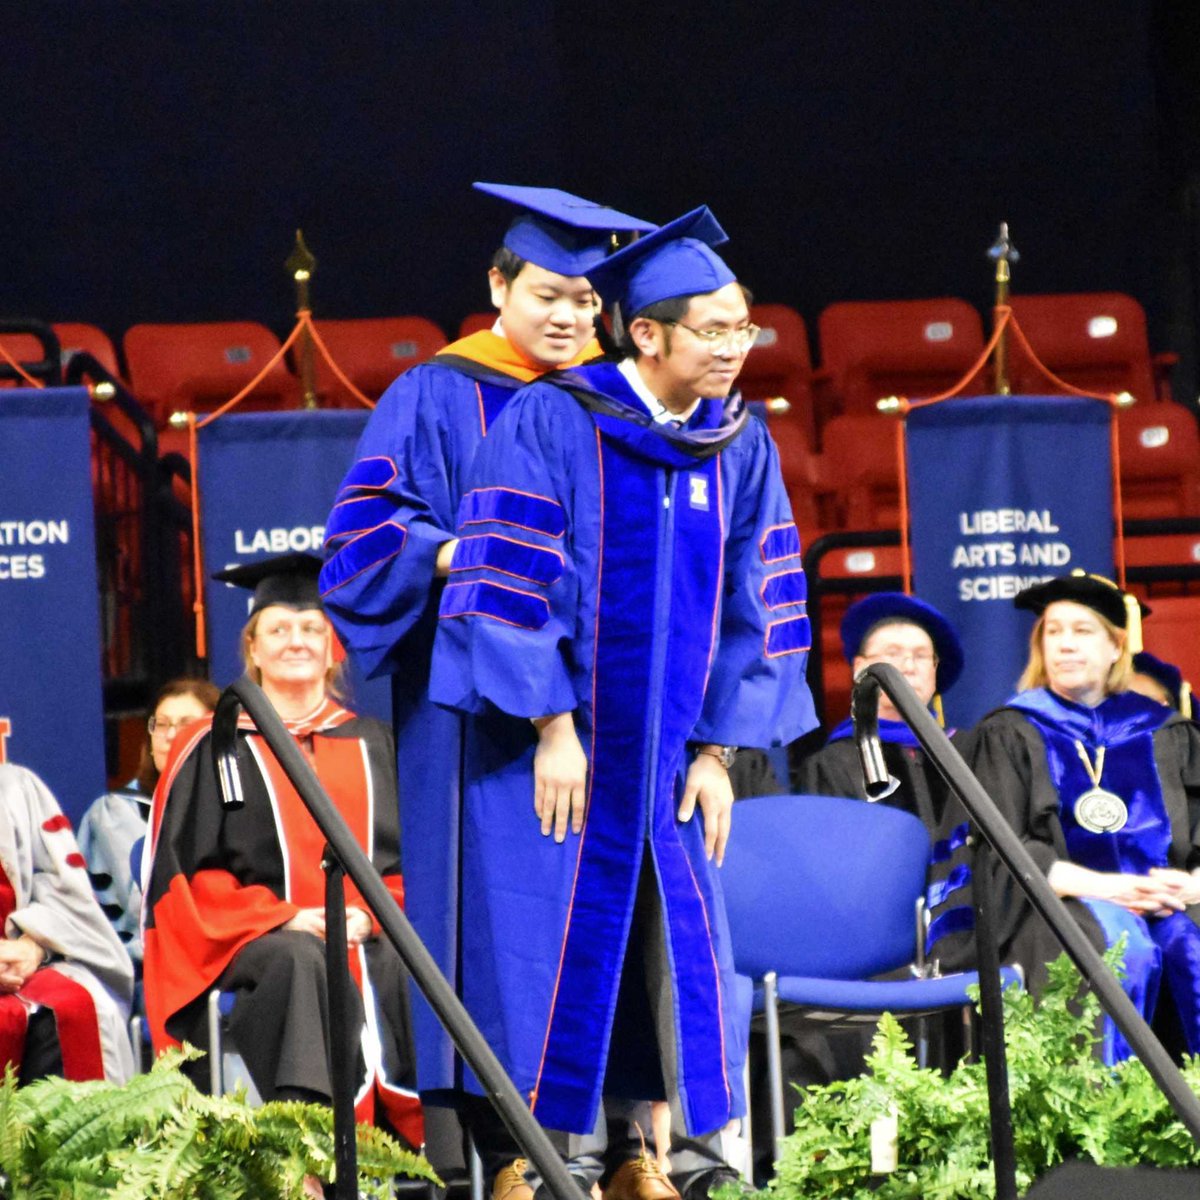 Hooded my first PhD graduate last Friday! Such a joy. Looking forward to the next ones!!